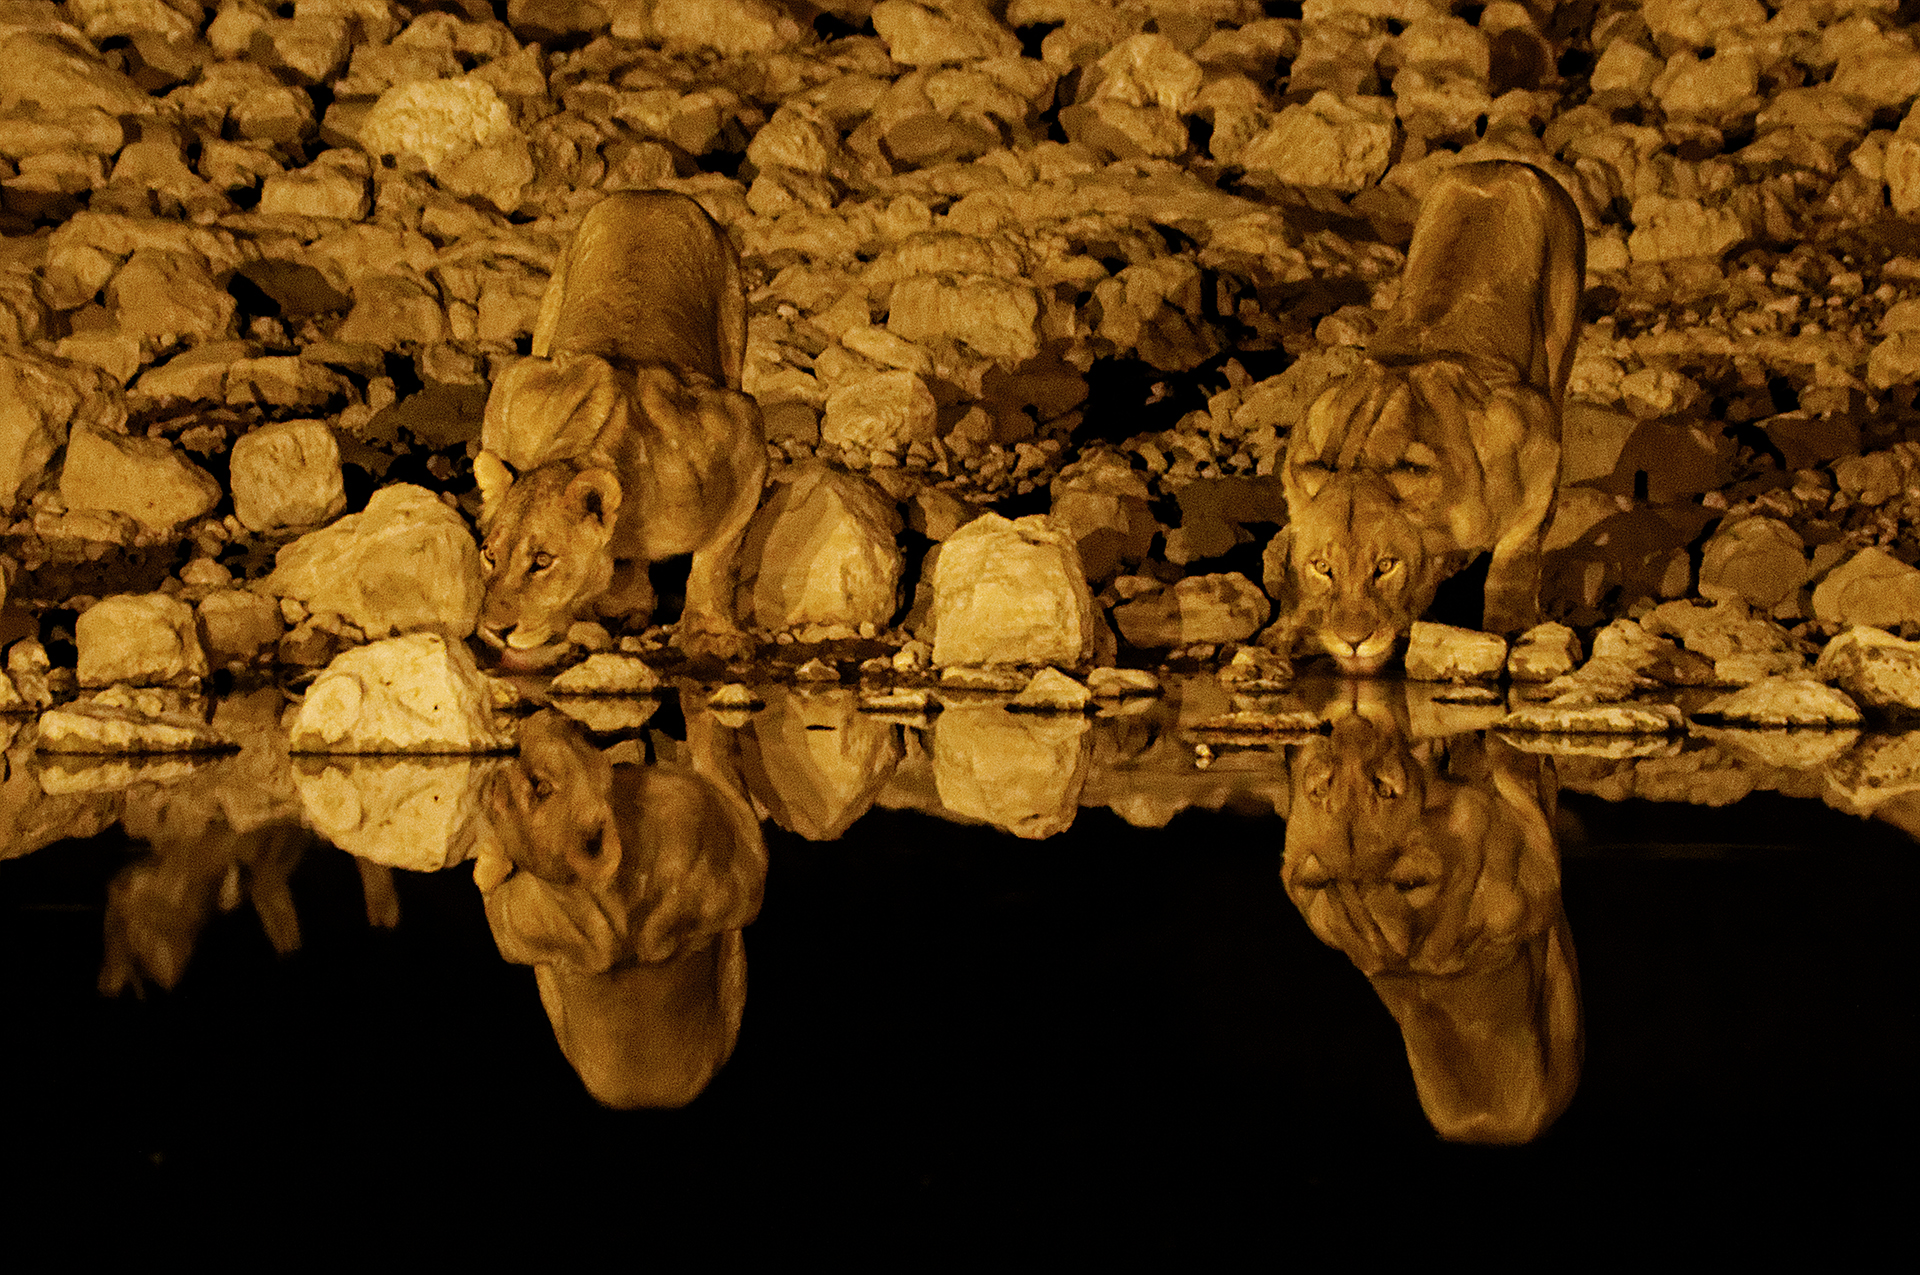 Lionesses in the mirror...